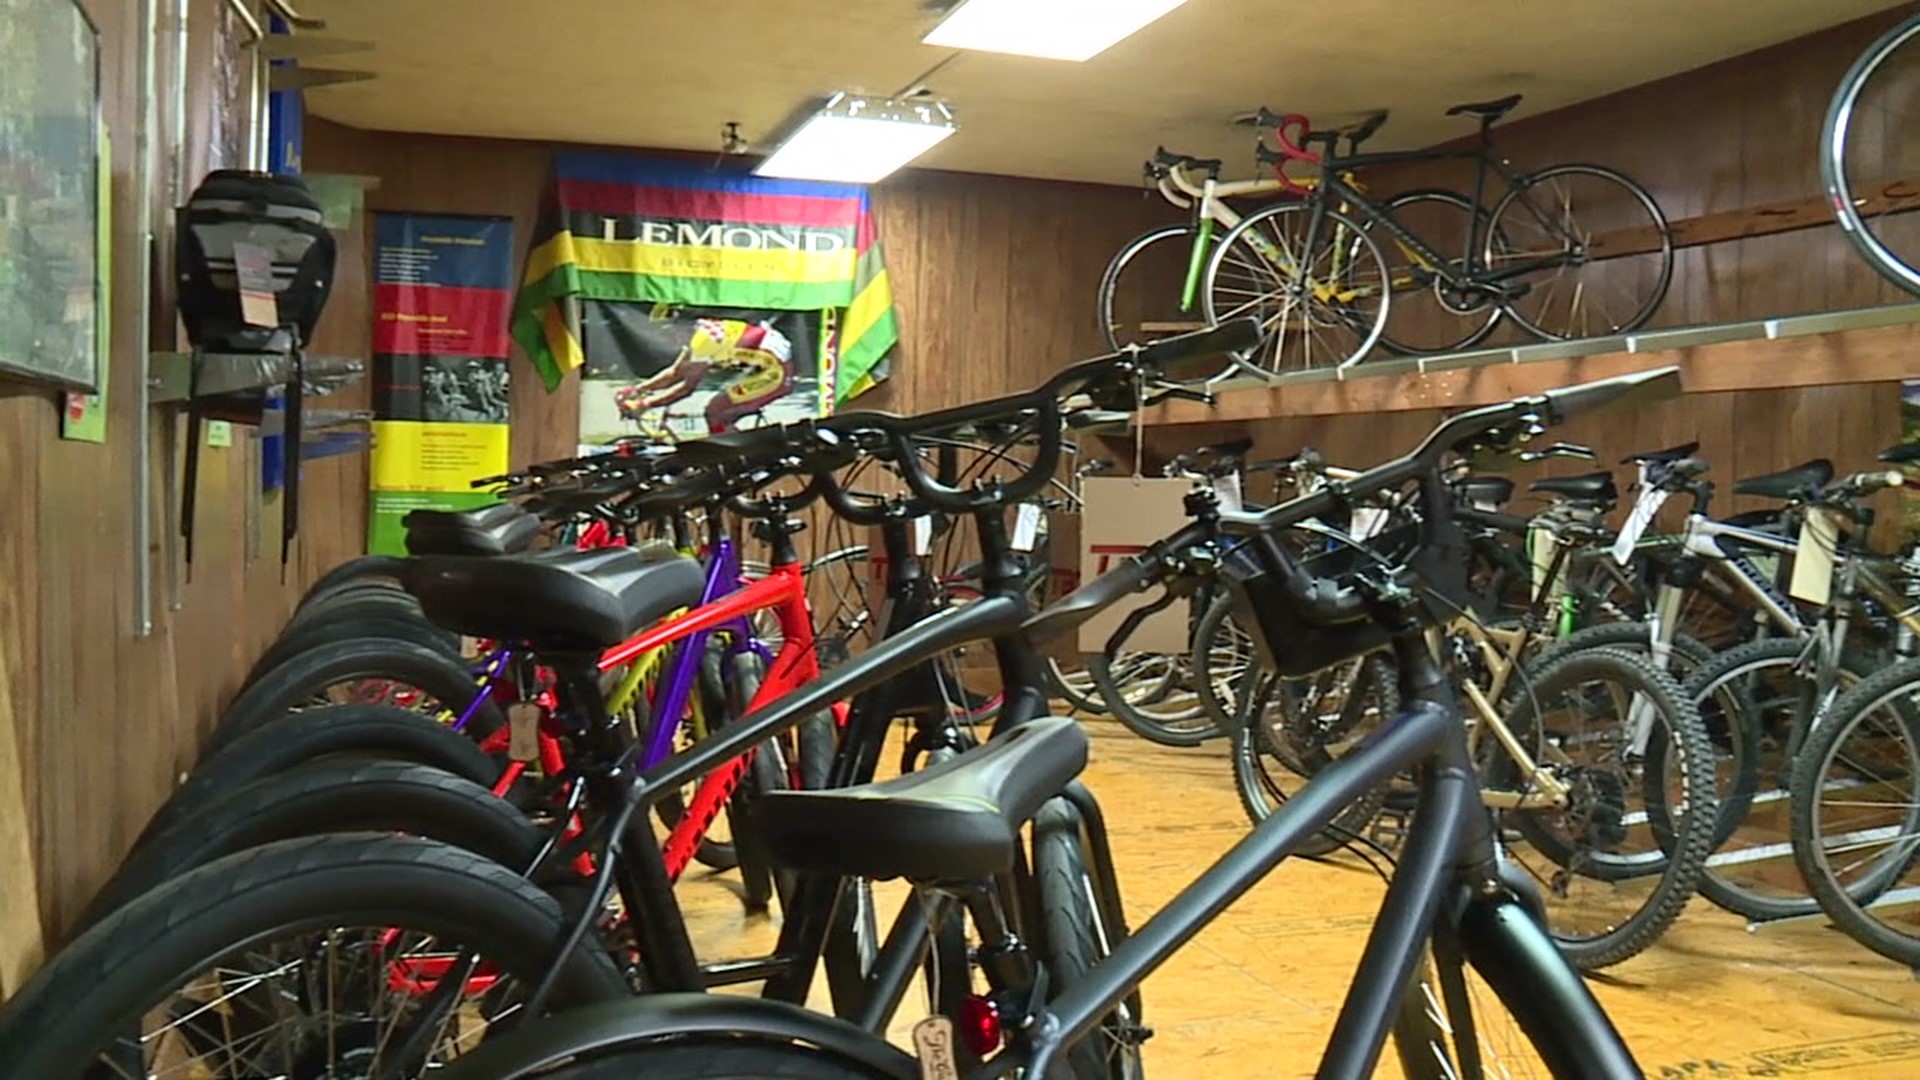 Demand for bikes has skyrocketed, leading to longer wait times for cyclists looking to buy.